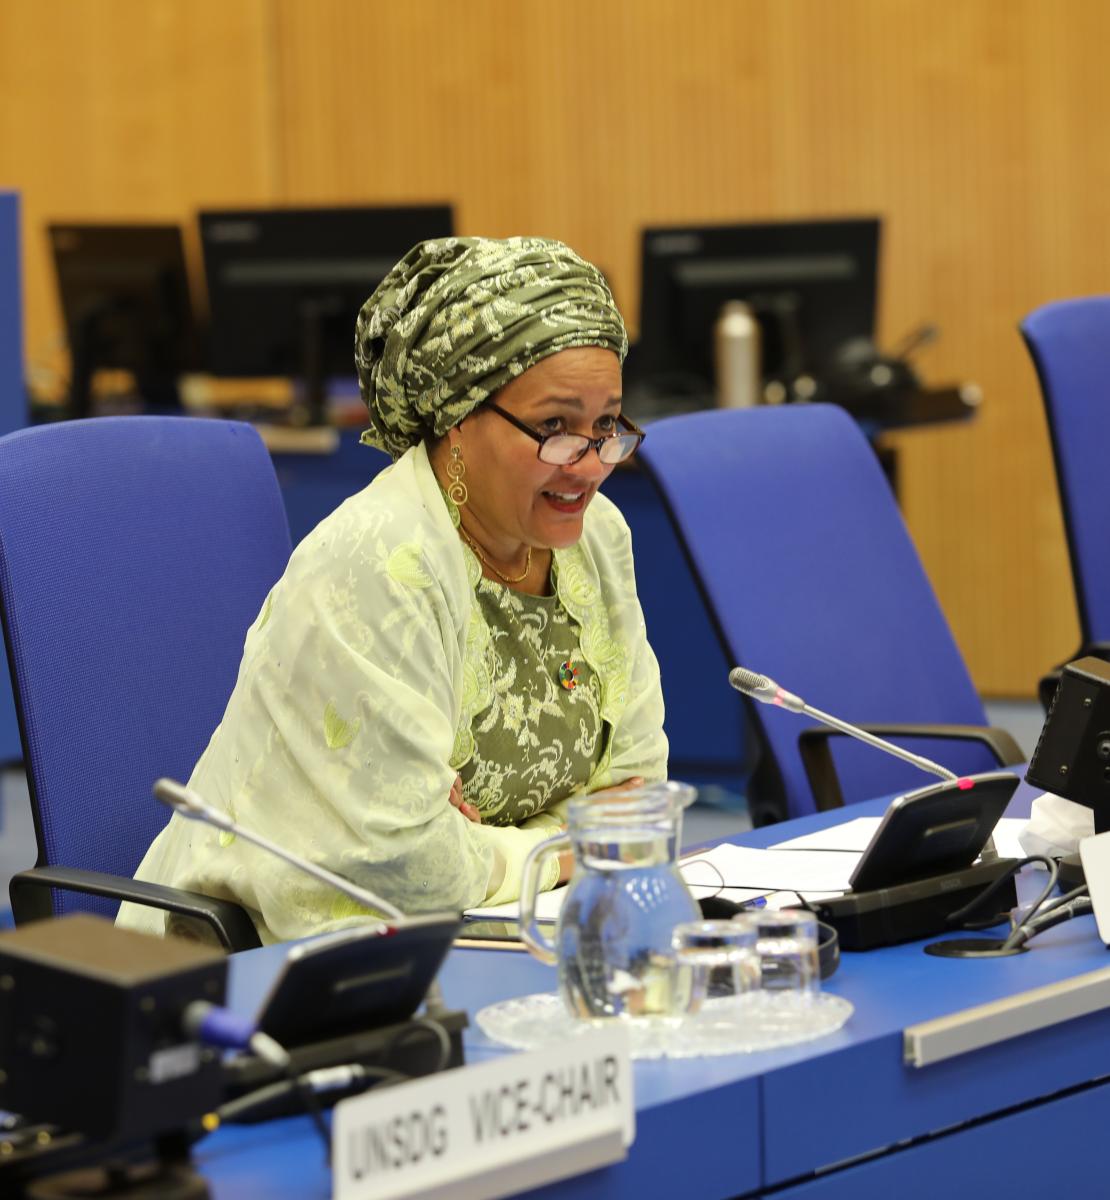 A woman in a yellow shawl in a blue chair speaks into a microphone at a UN meeting.